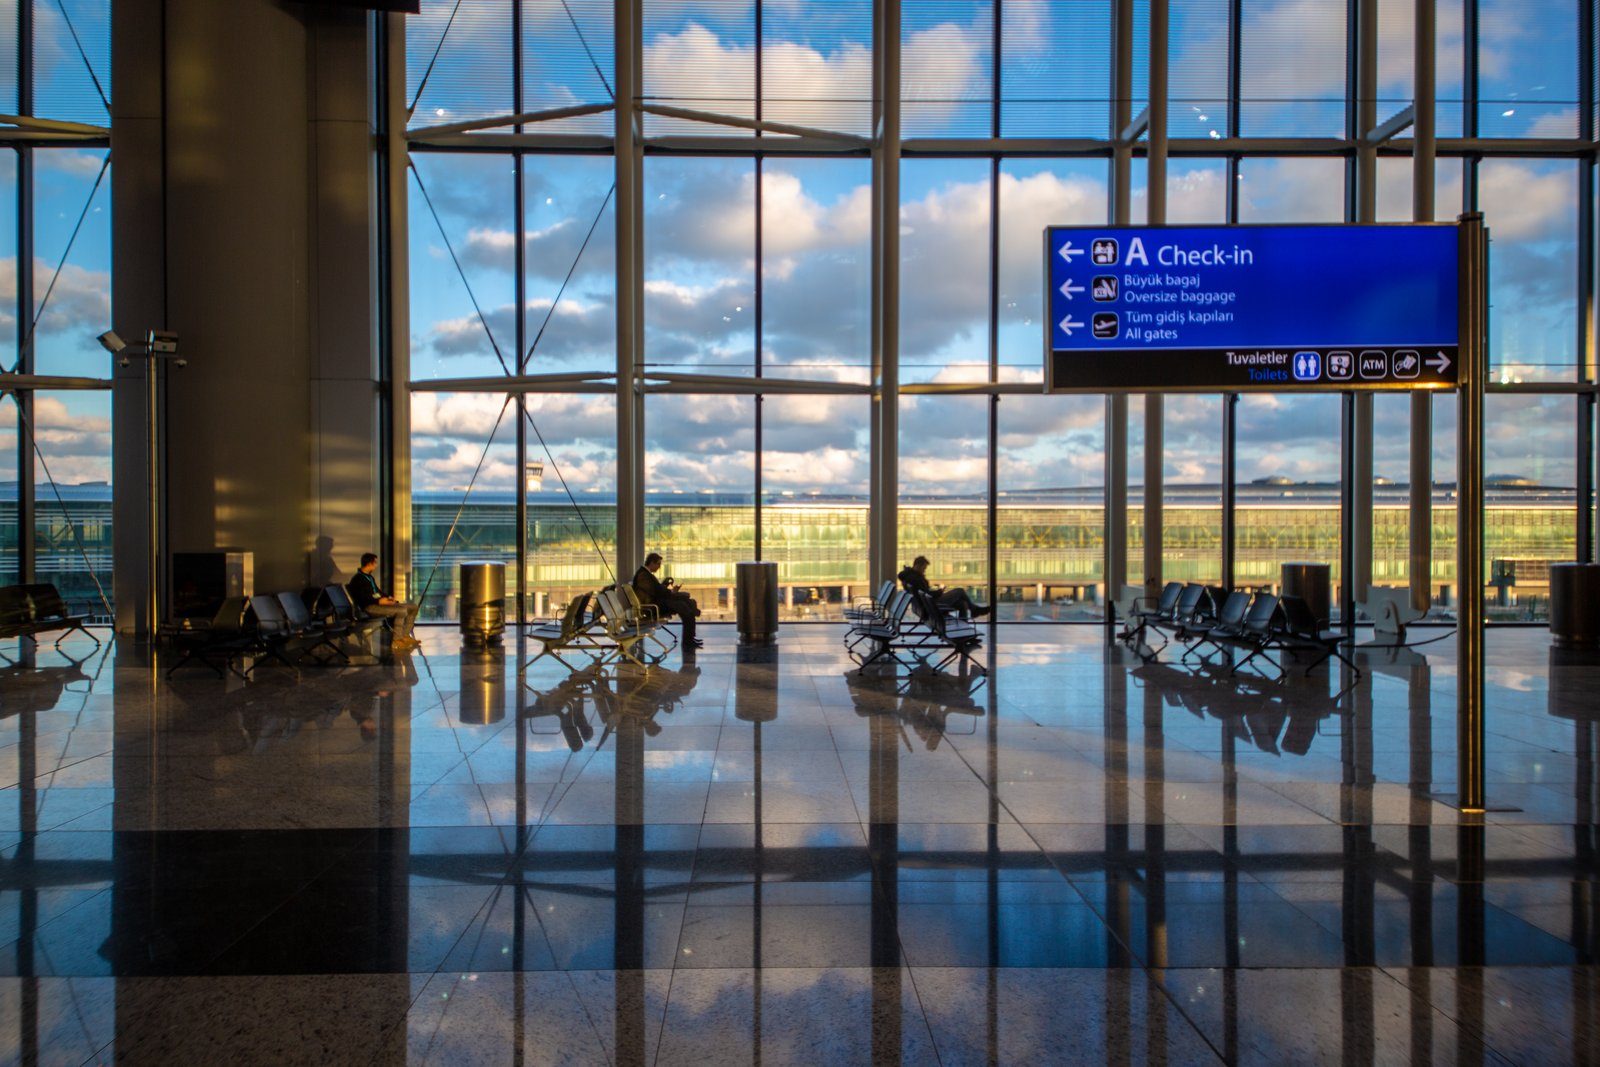 Take a Peek Inside the Biggest Airport in the World Reader's Digest